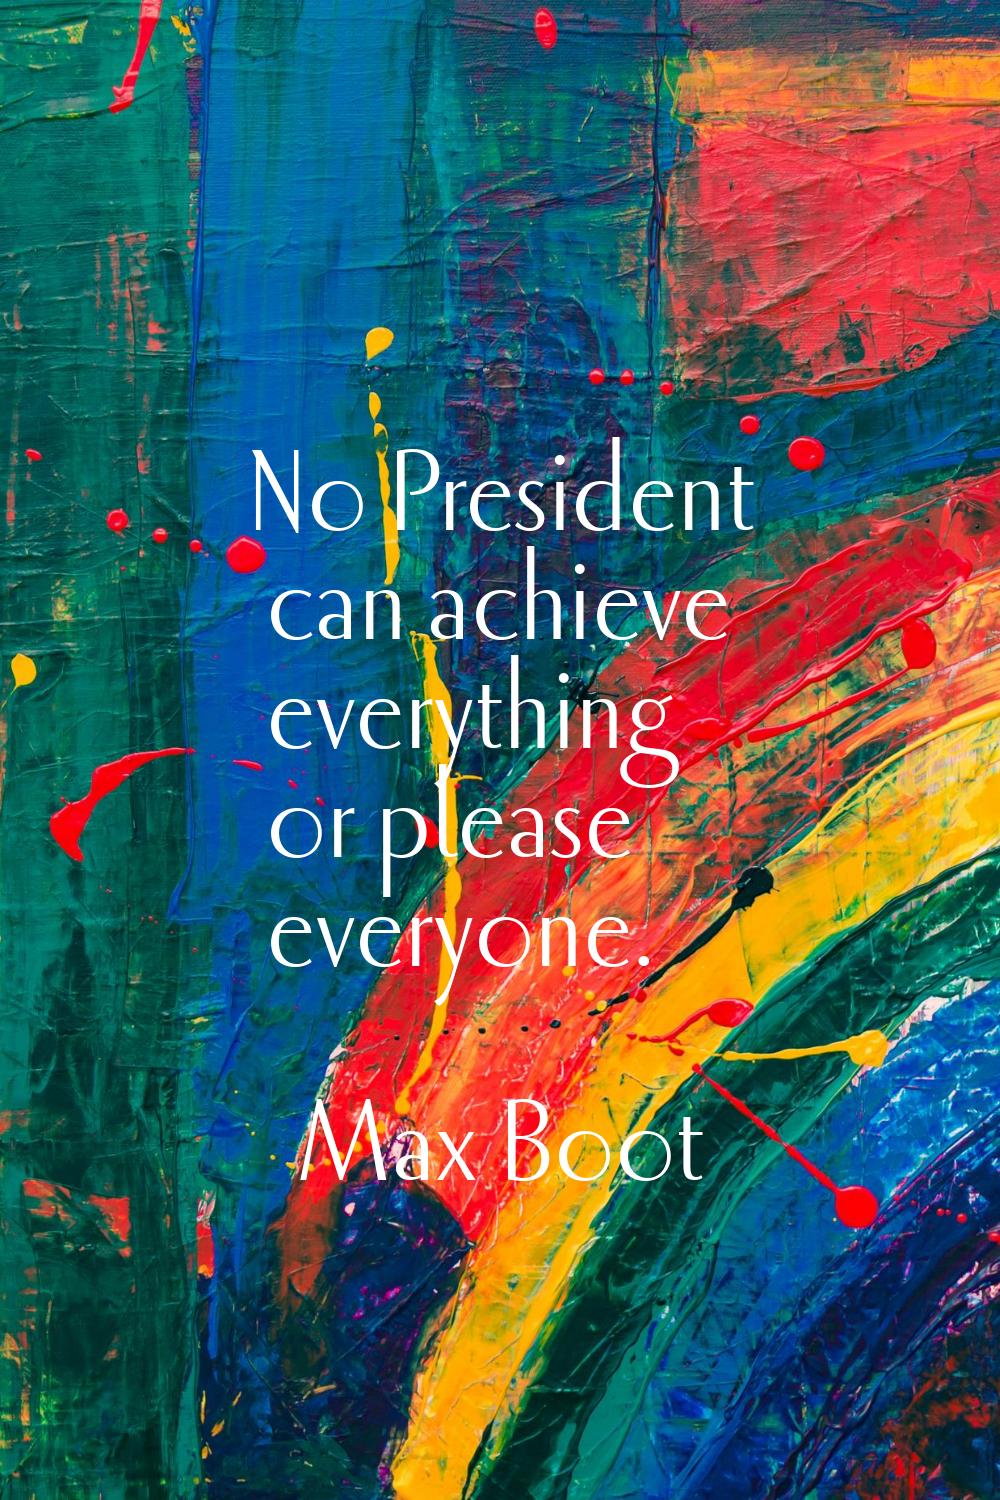 No President can achieve everything or please everyone.